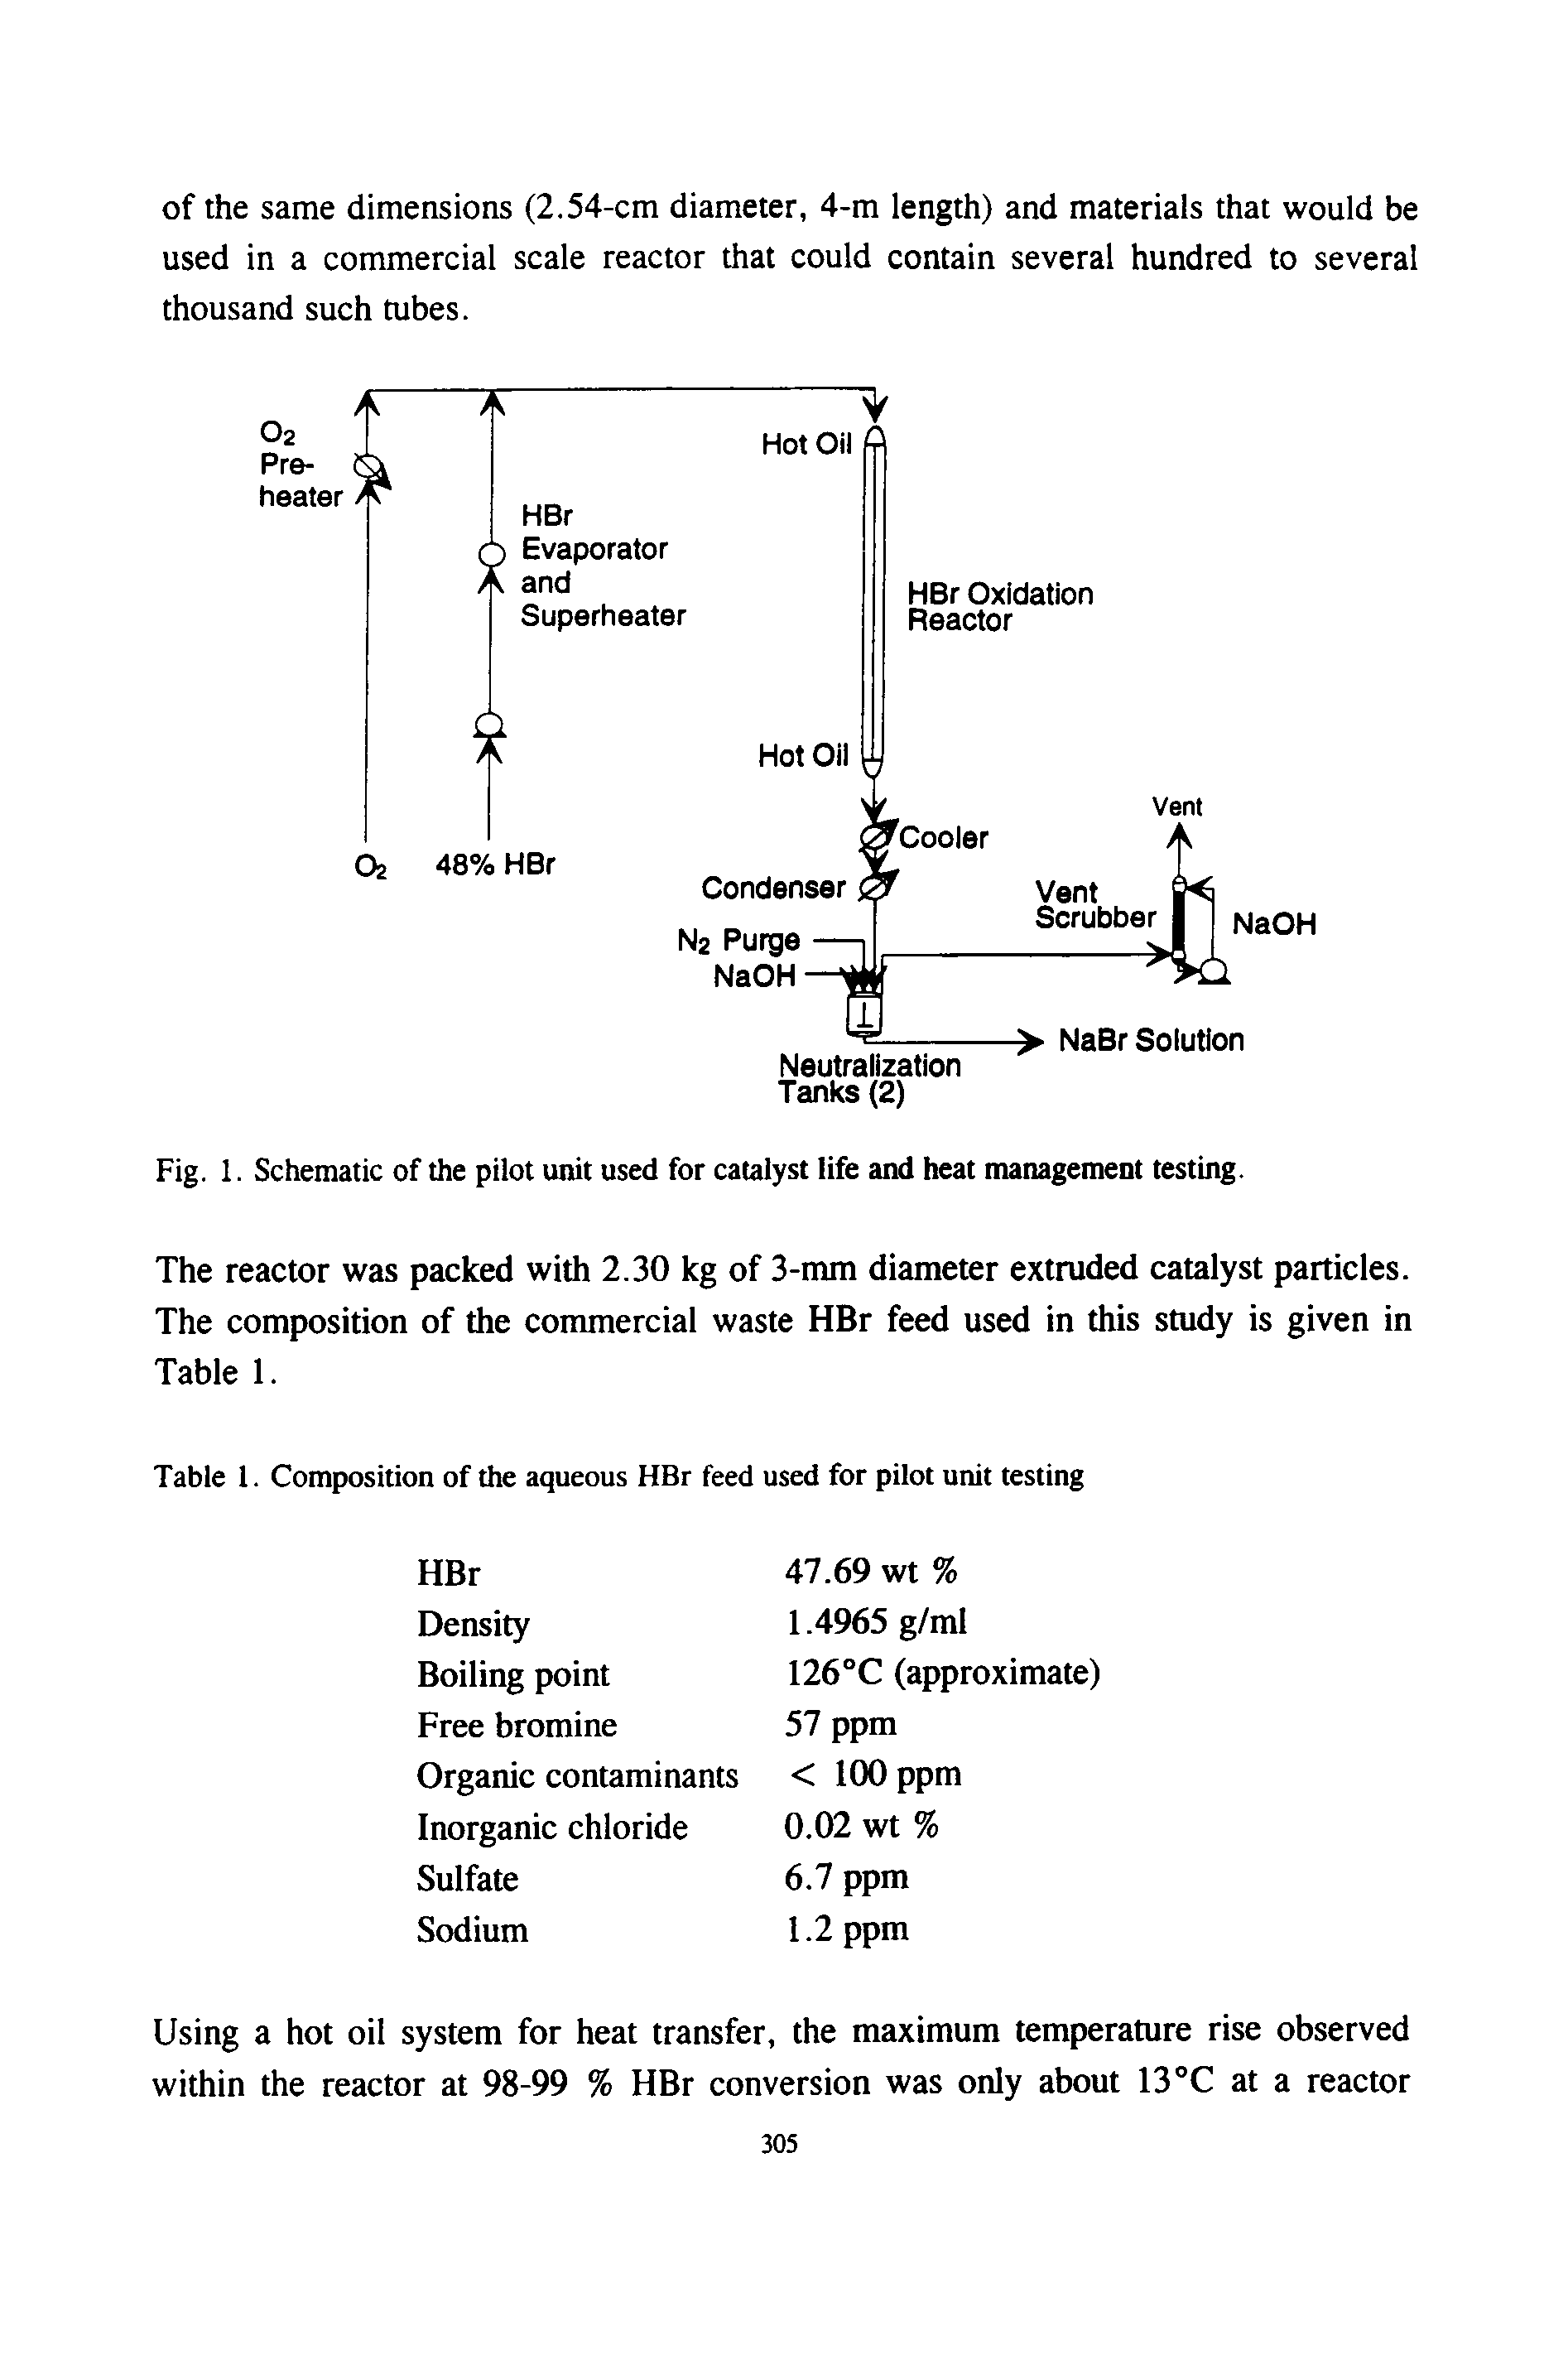 Fig. 1. Schematic of the pilot unit used for catalyst life and heat management testing.